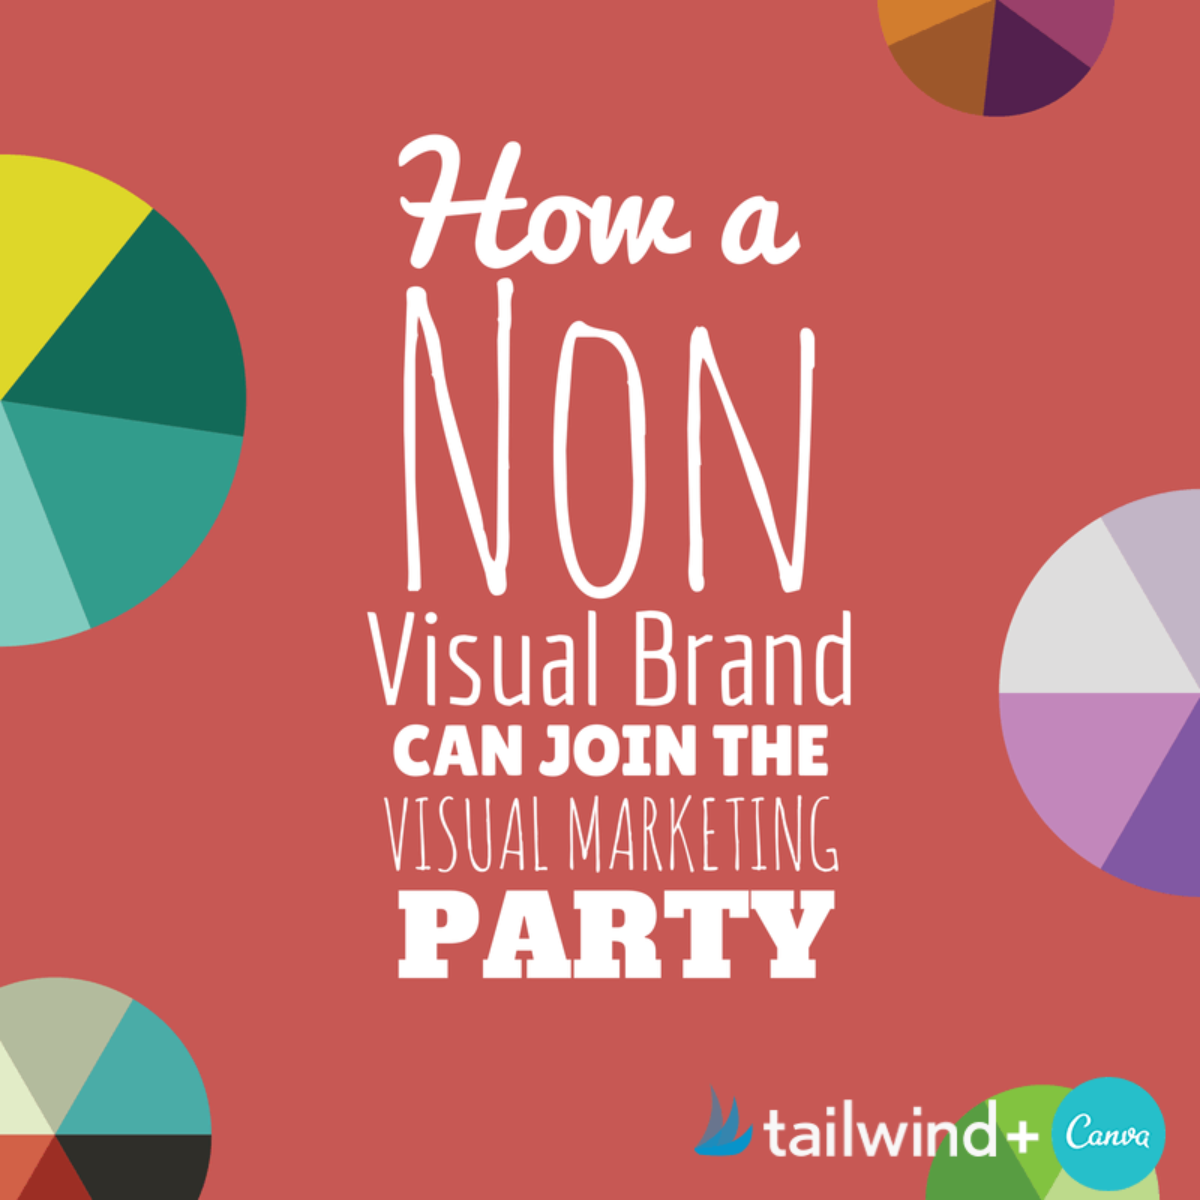 How A Non-Visual Brand Can Join the Visual Marketing Party